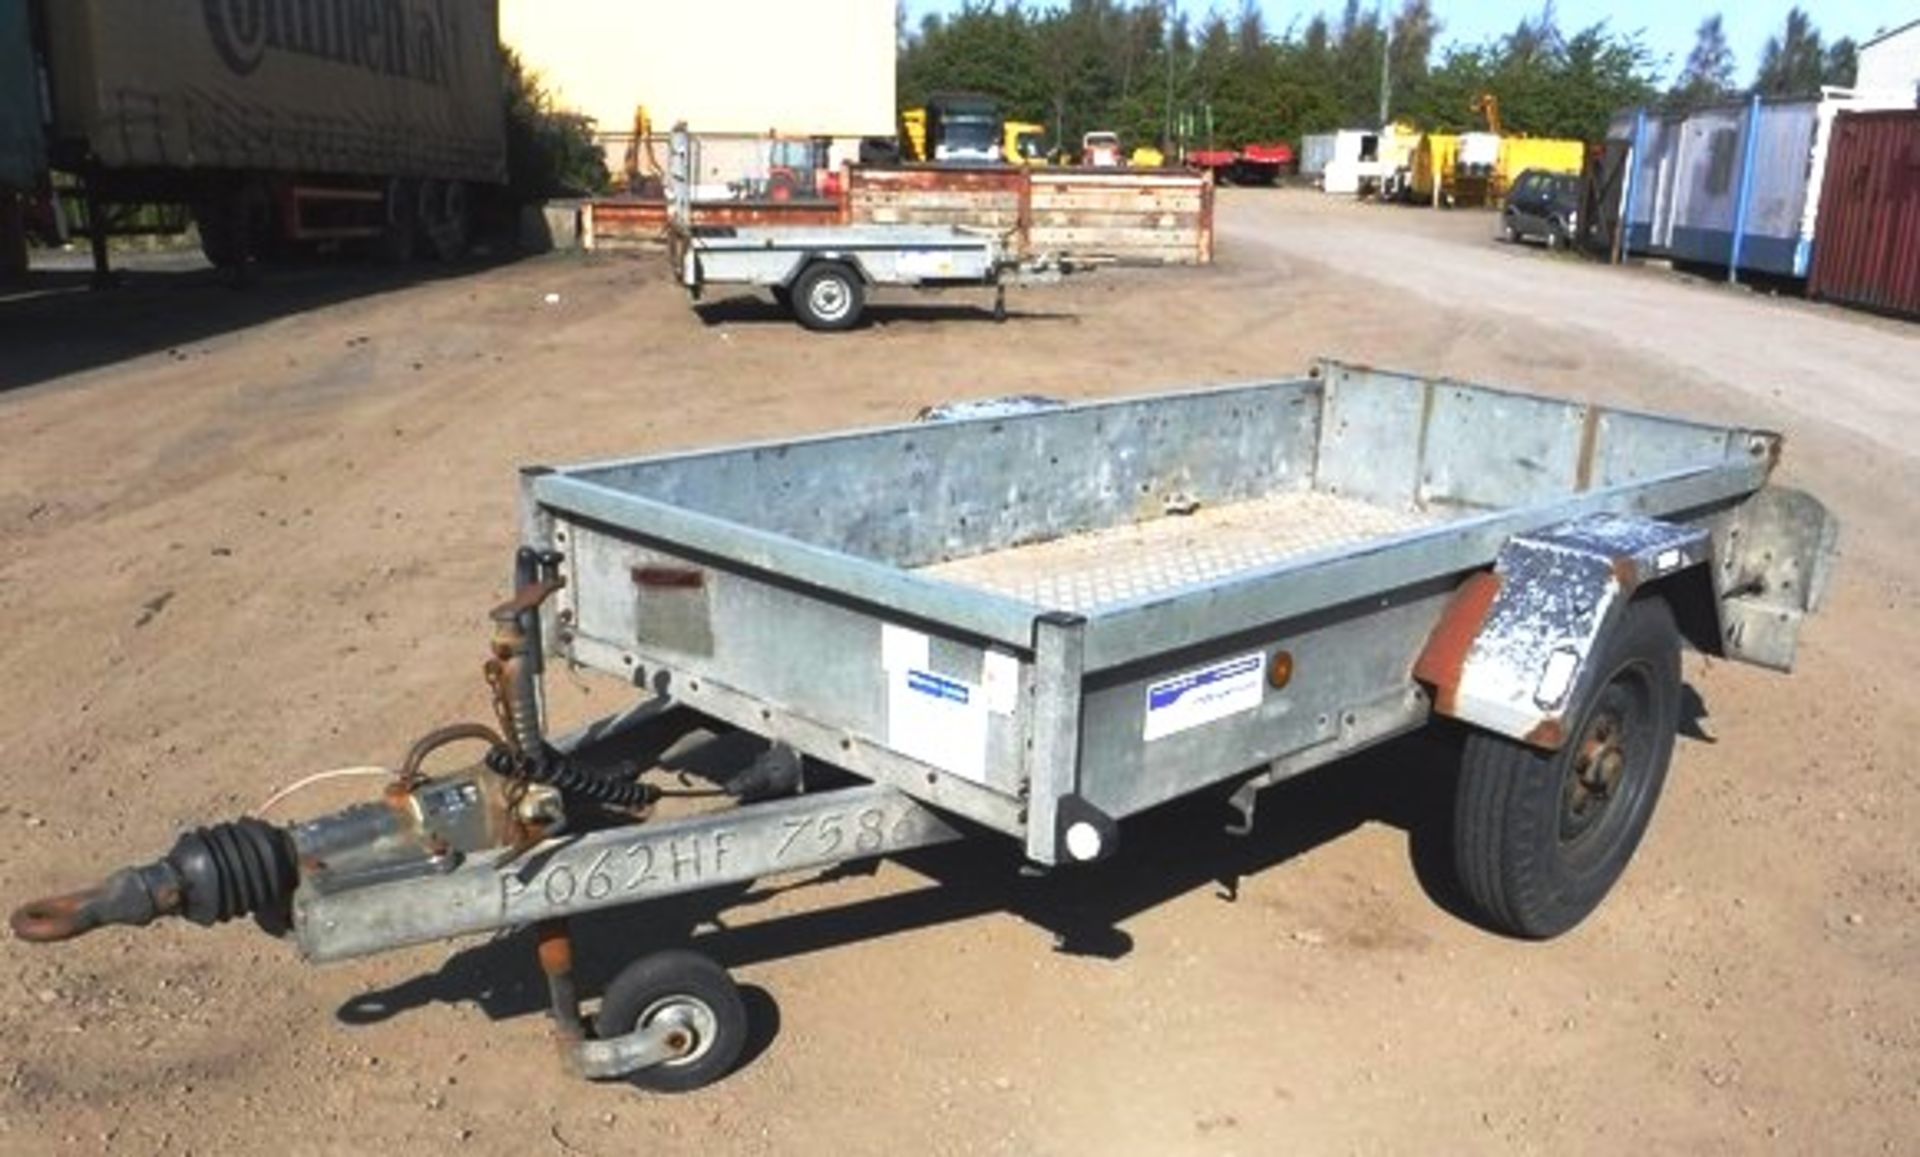 INDESPENSION single axle trailer. 8ft x 4ft. Asset - 758-6230